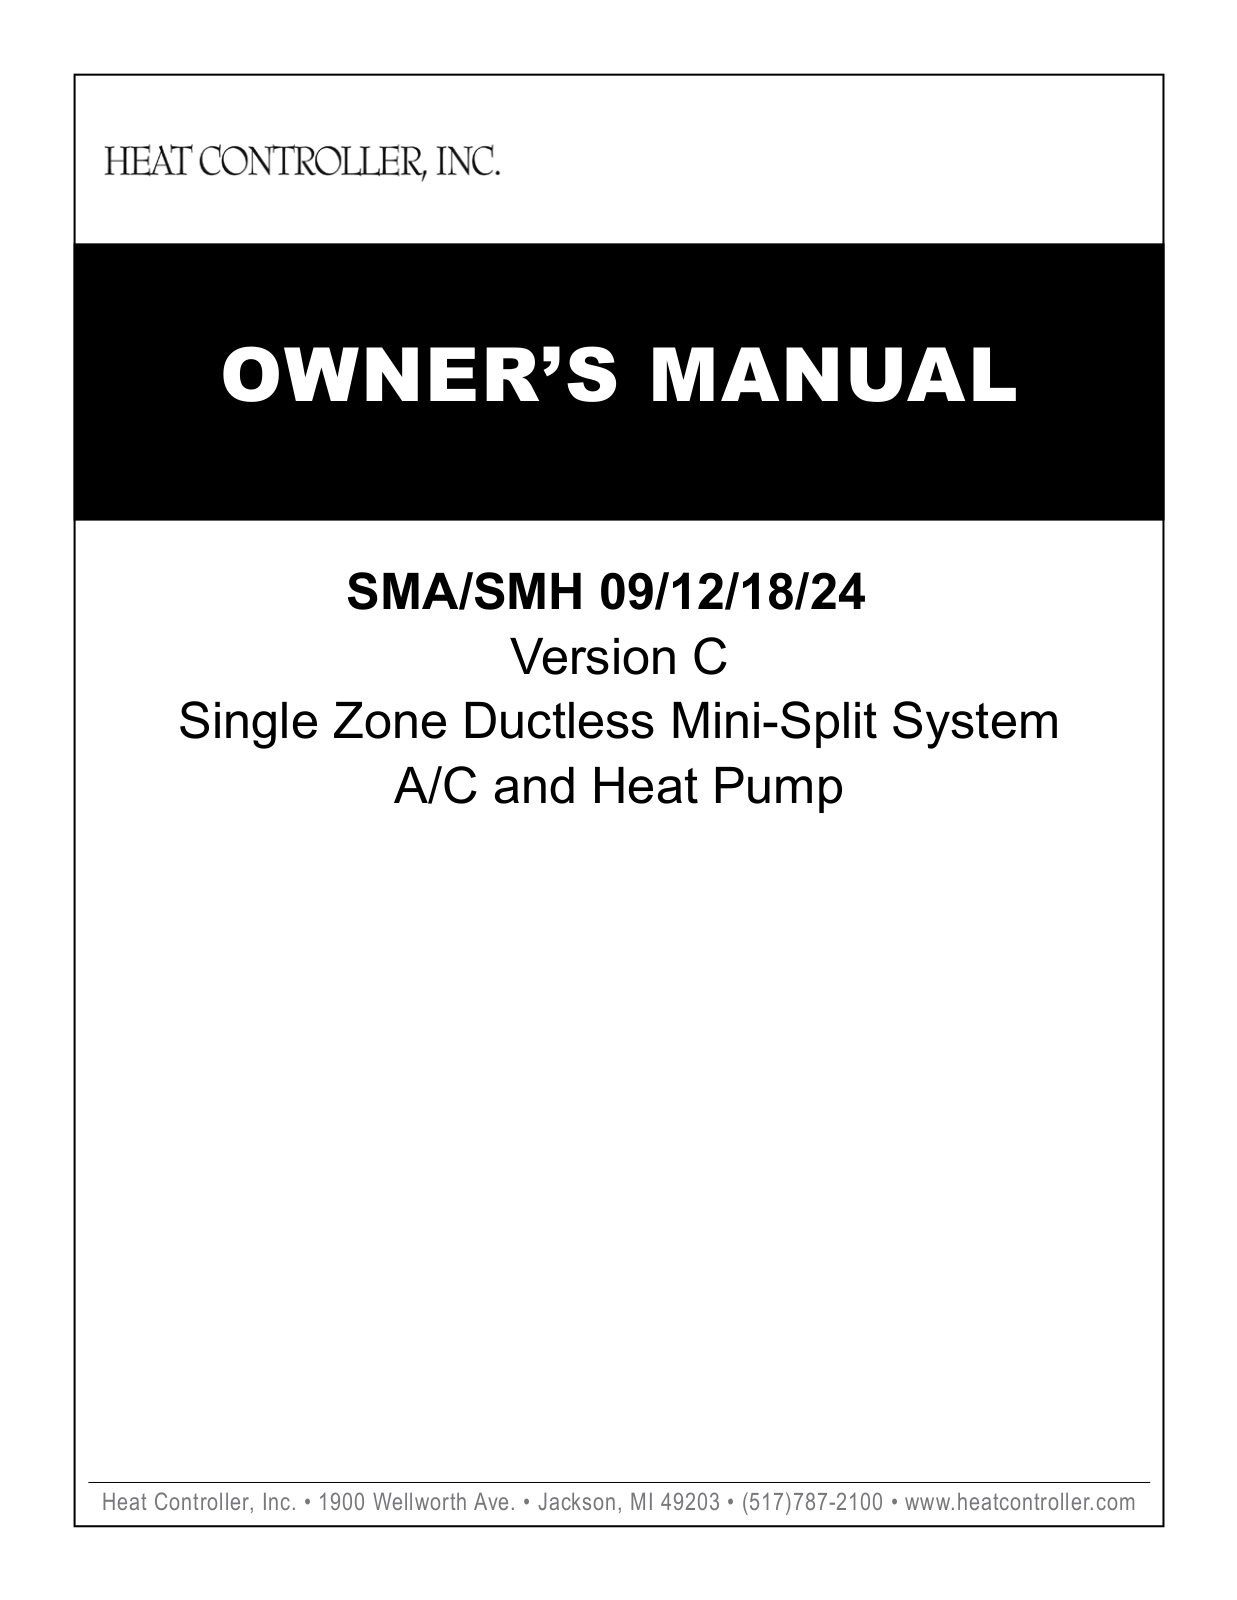 Heat Controller S Single Zone Owner's Manual